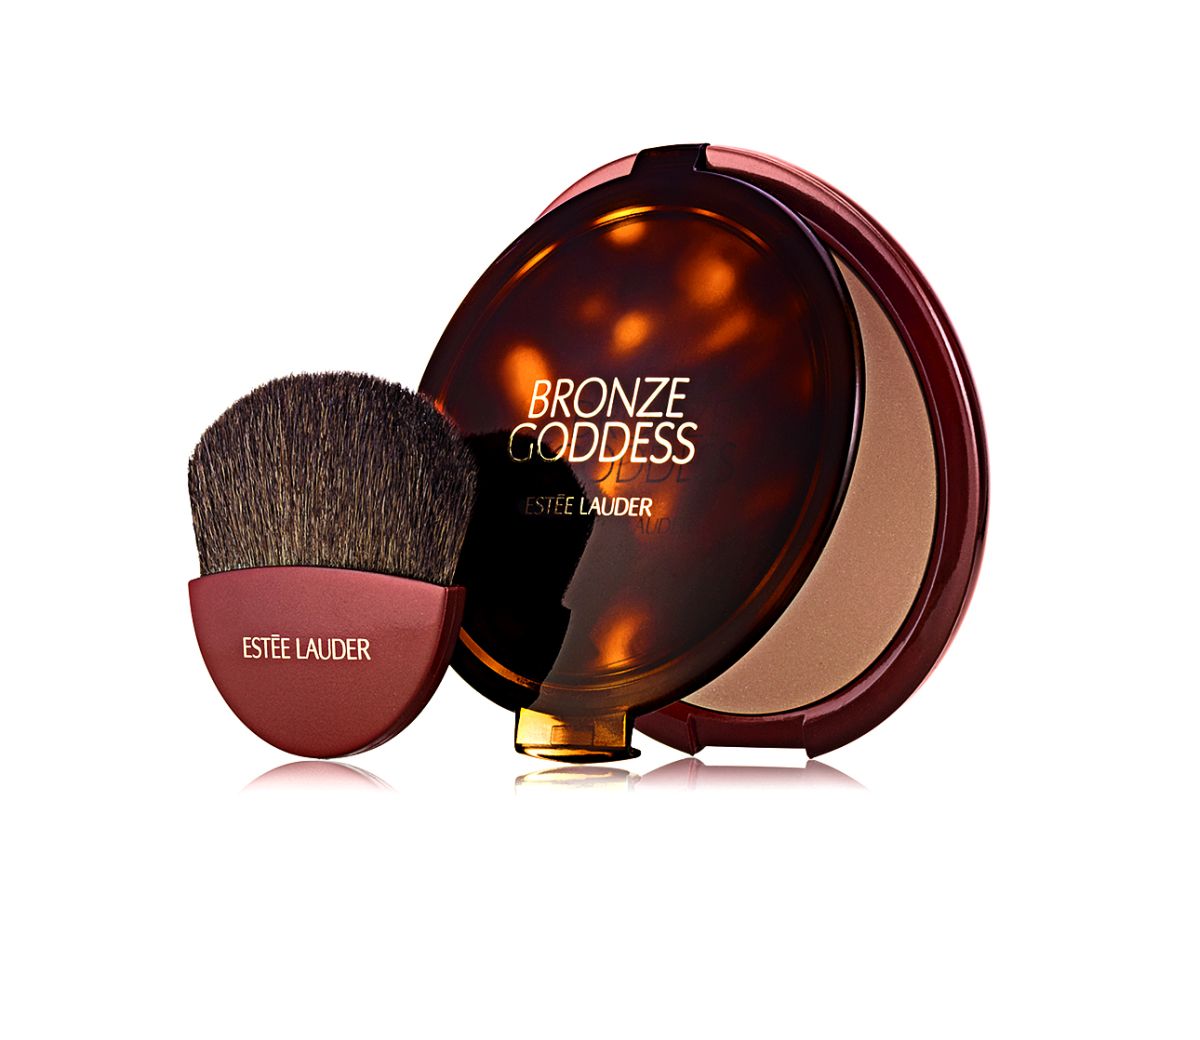 web_Bronze Goddess_Product on White_Bronzer_Global_Expiry March 2018